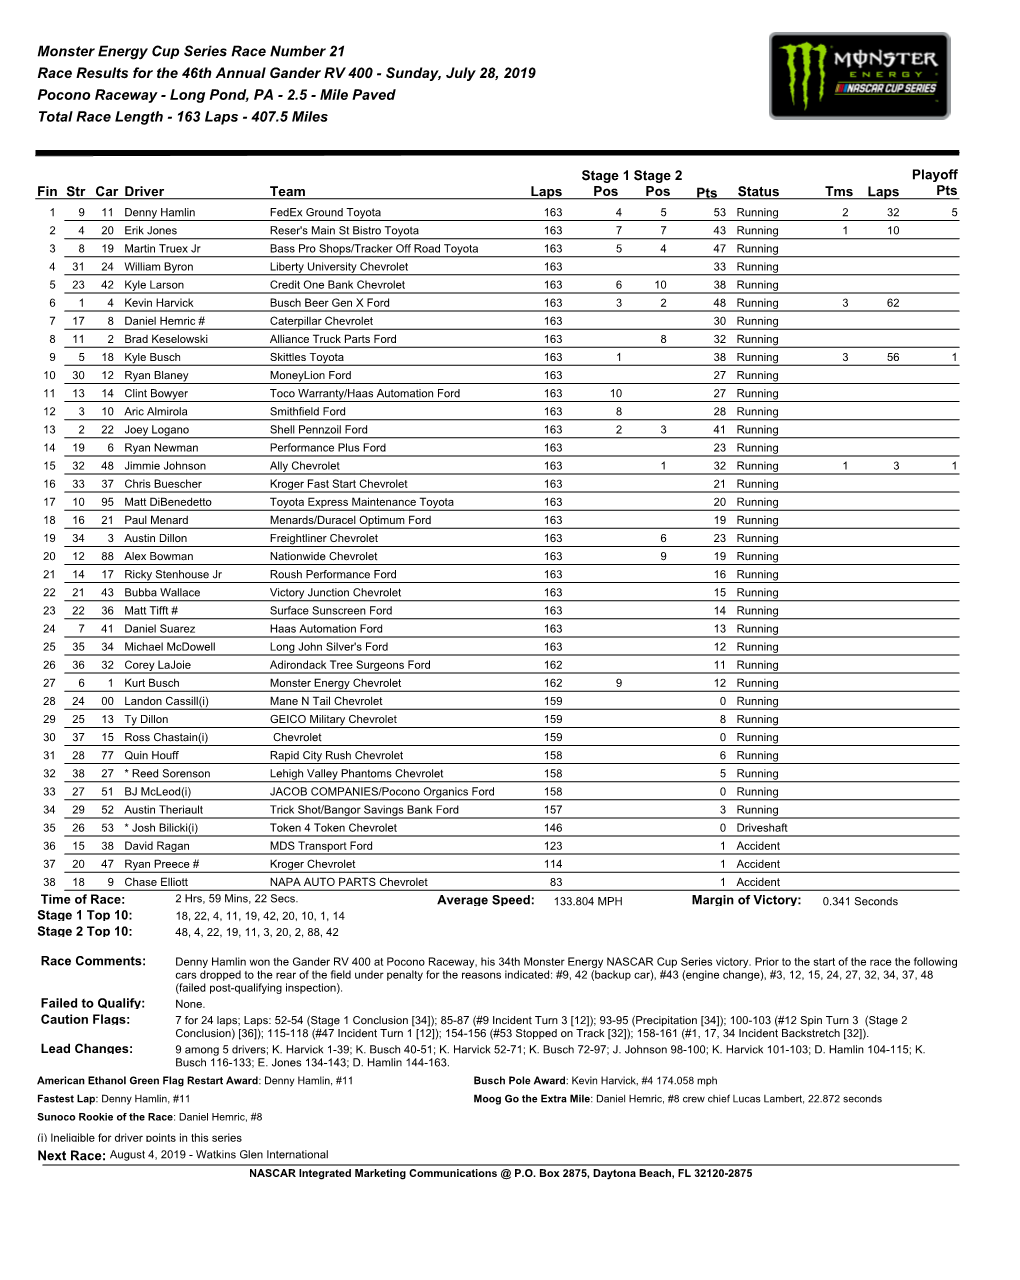 Monster Energy Cup Series Race Number 21 Race Results for the 46Th Annual Gander RV